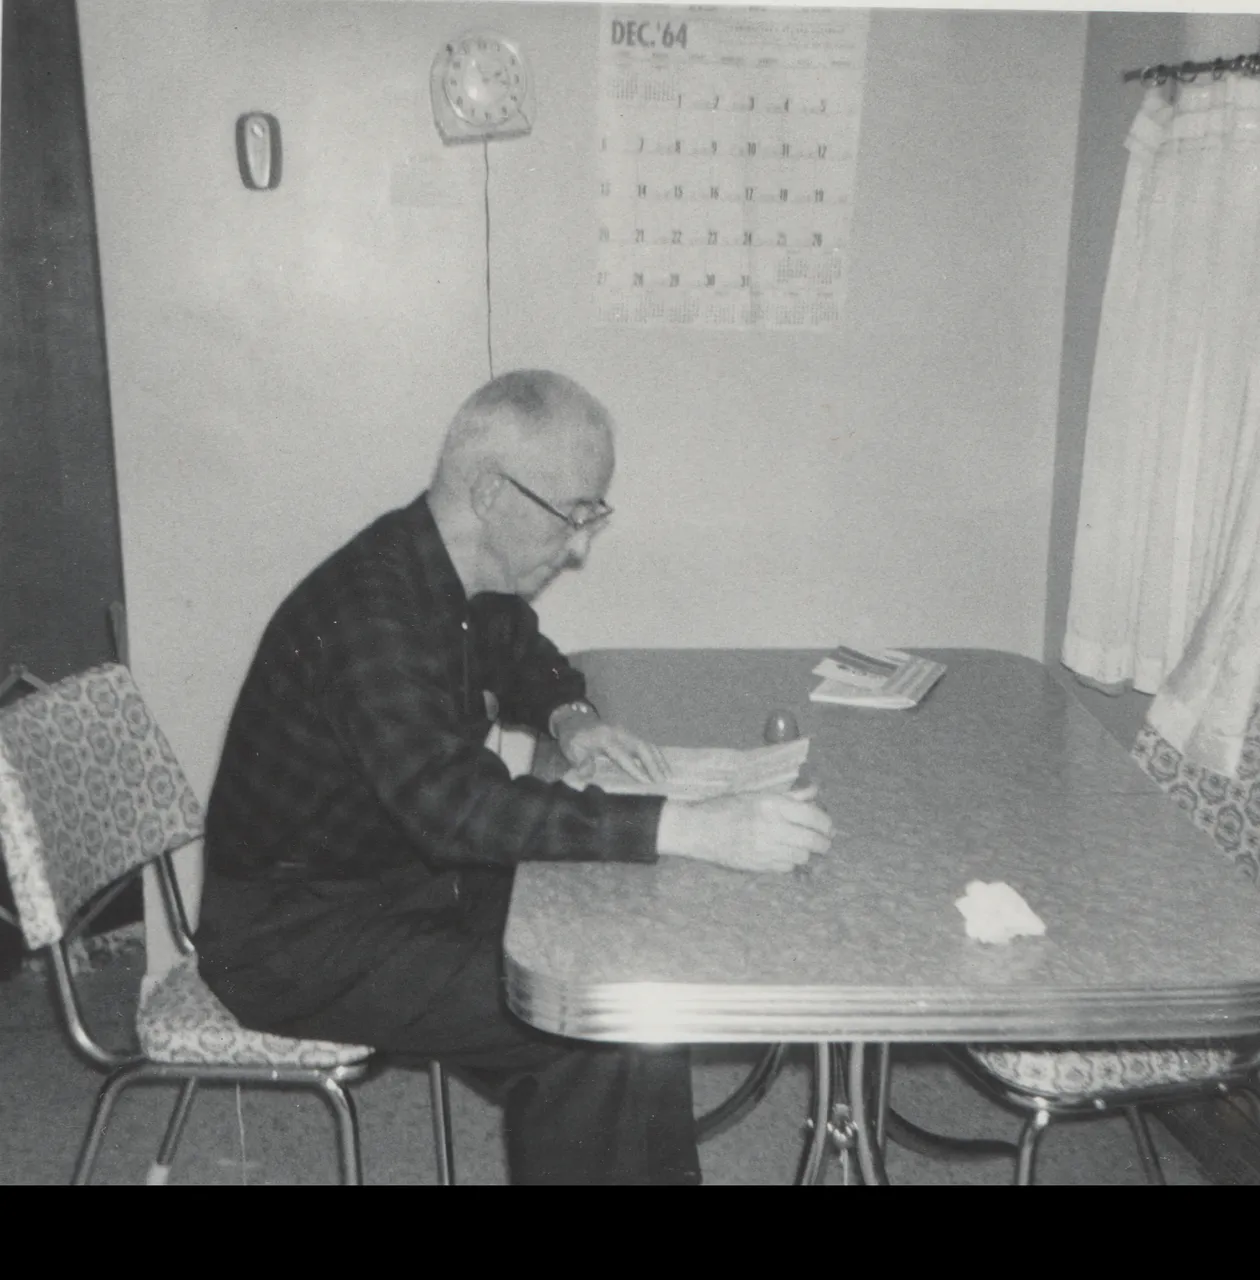 1964-12 - Charles Dwight Pickett, sitting on a chair at a kitchen table or something in black and white, calendar says Dec 64 but was developed in Feb 1965, 1pic.png